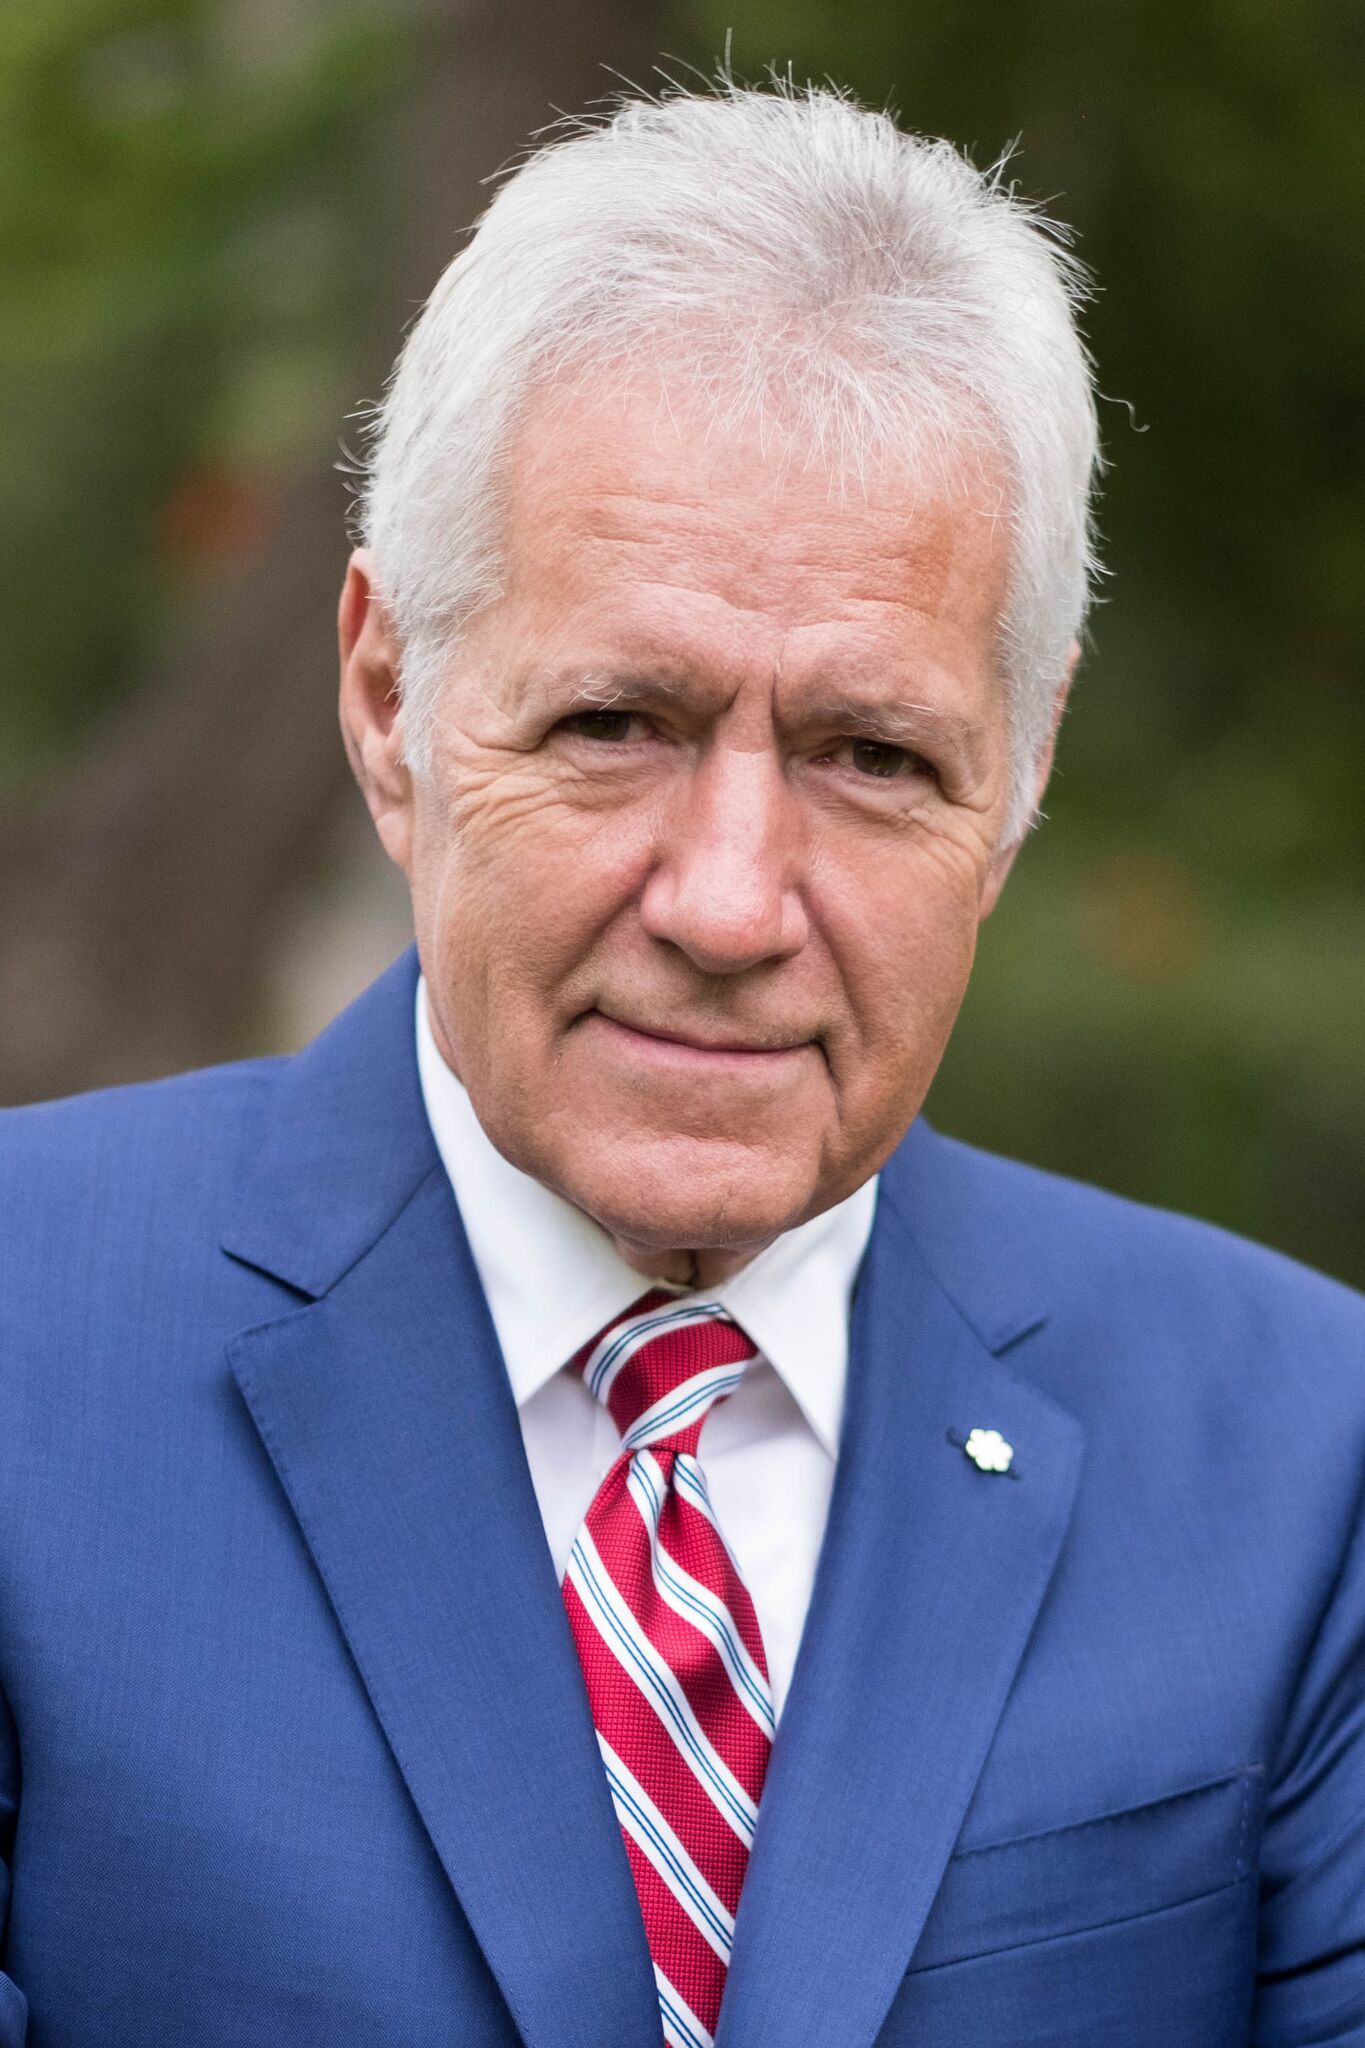 TV personality Alex Trebek attends the 150th anniversary of Canada's Confederation at the Official Residence of Canada | Source: Getty Images